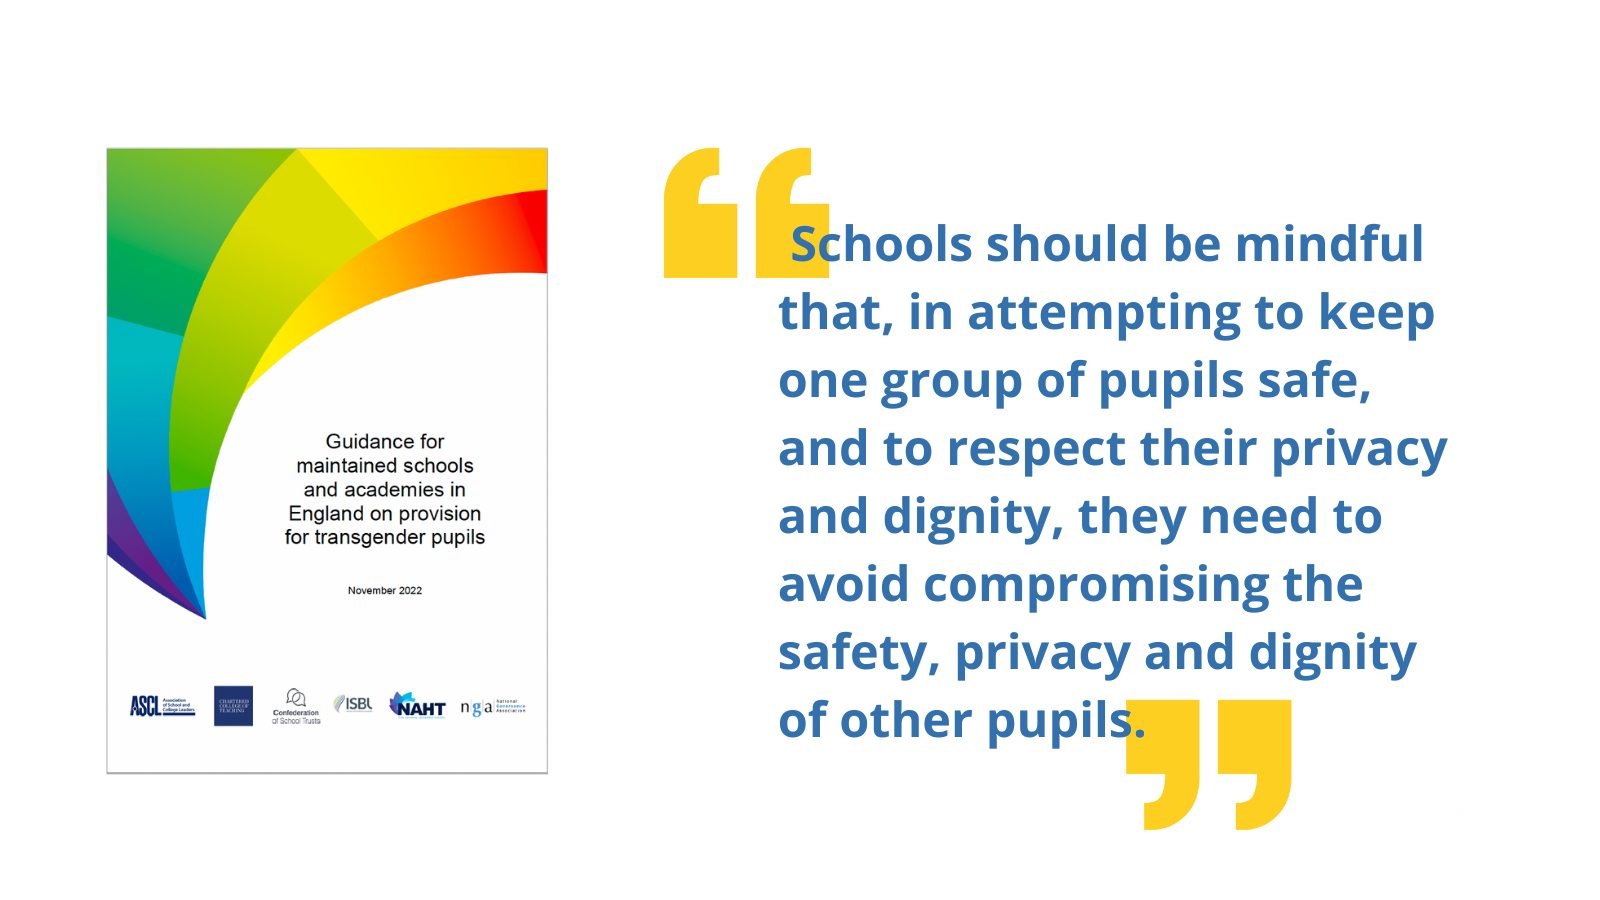 Schools should be mindful that, in attempting to keep one group of pupils safe, and to respect their privacy and dignity, they need to avoid compromising the safety, privacy and dignity of other pupils.